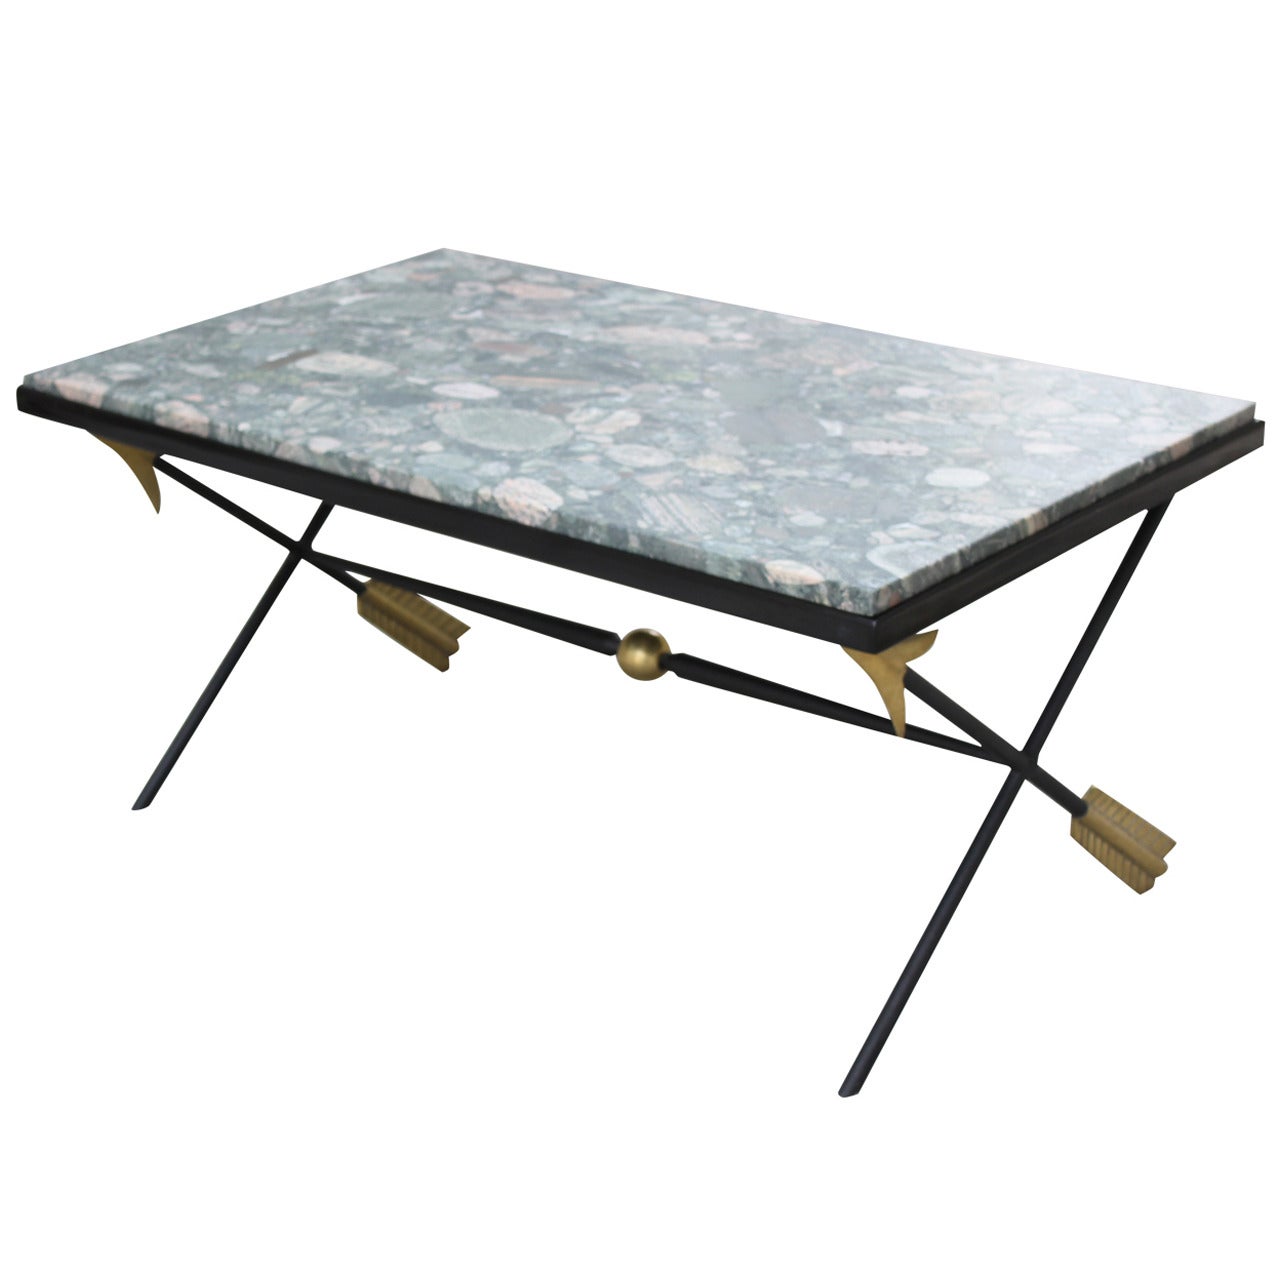 Arturo Pani Brass and Iron, Lacquered Wood and Stone Cocktail Table